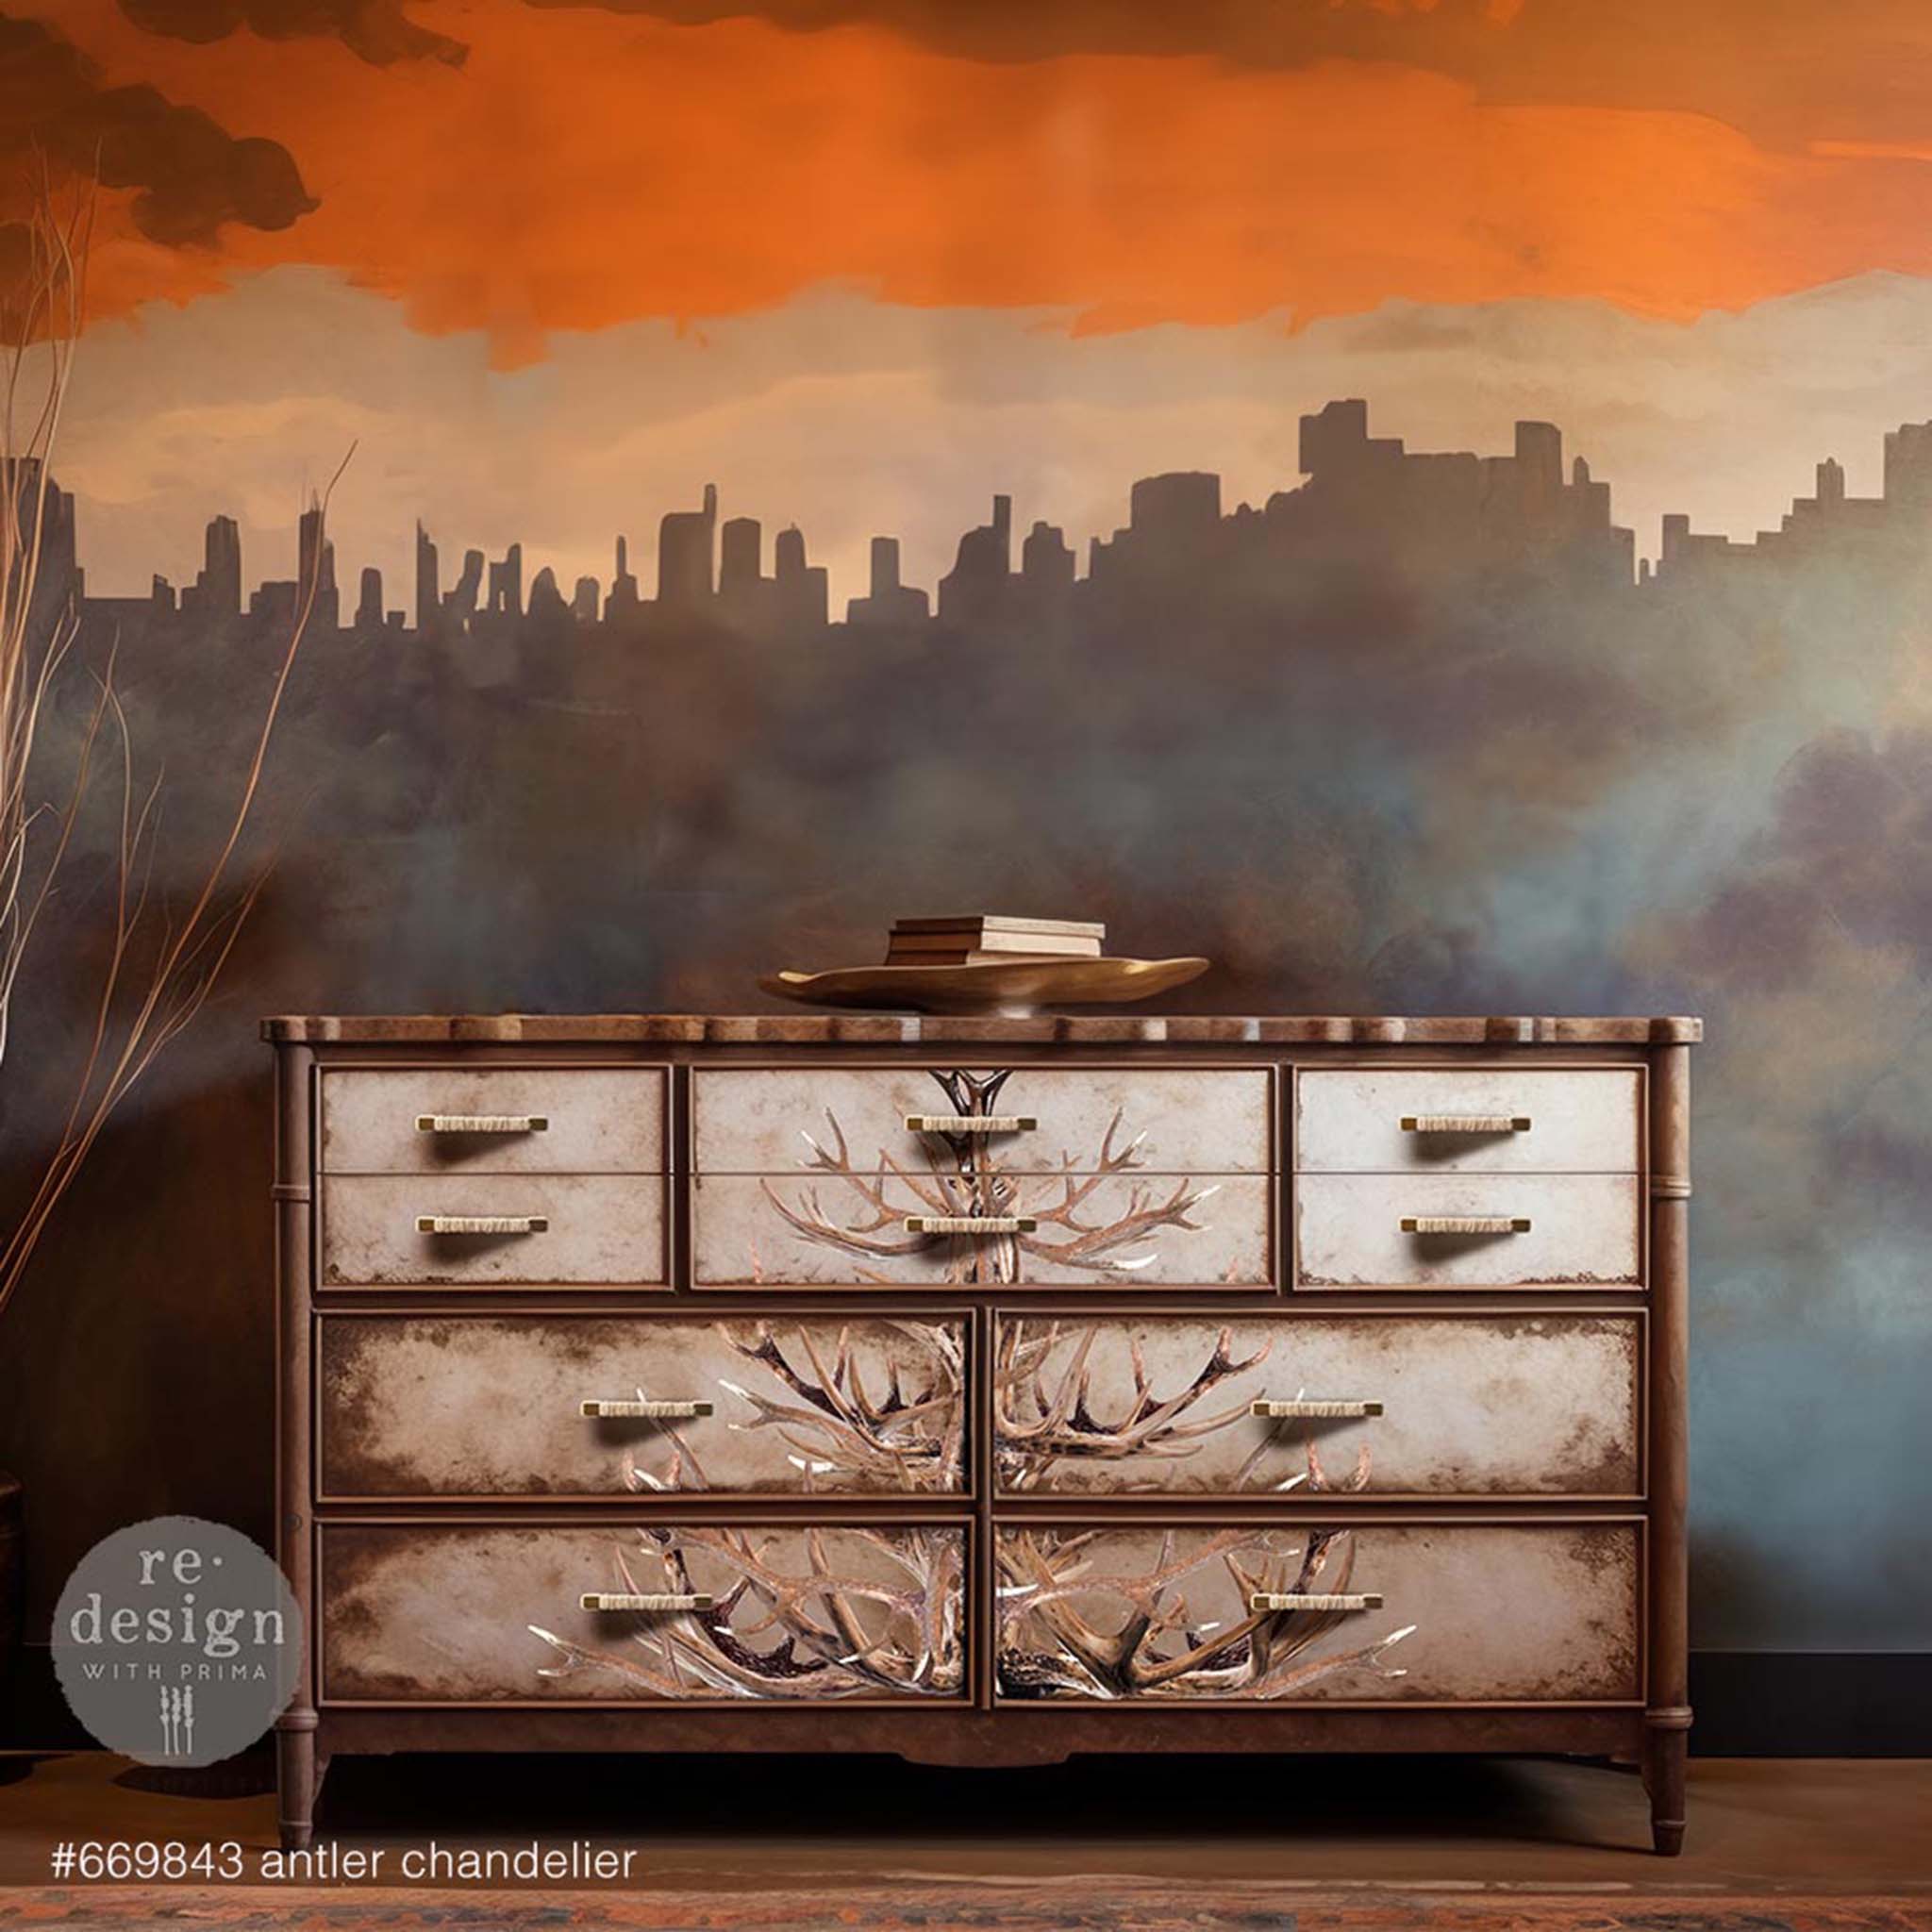 A vintage 10-drawer dresser is painted brown and features ReDesign with Prima's Antler Chandelier transfer down the center of the drawers.